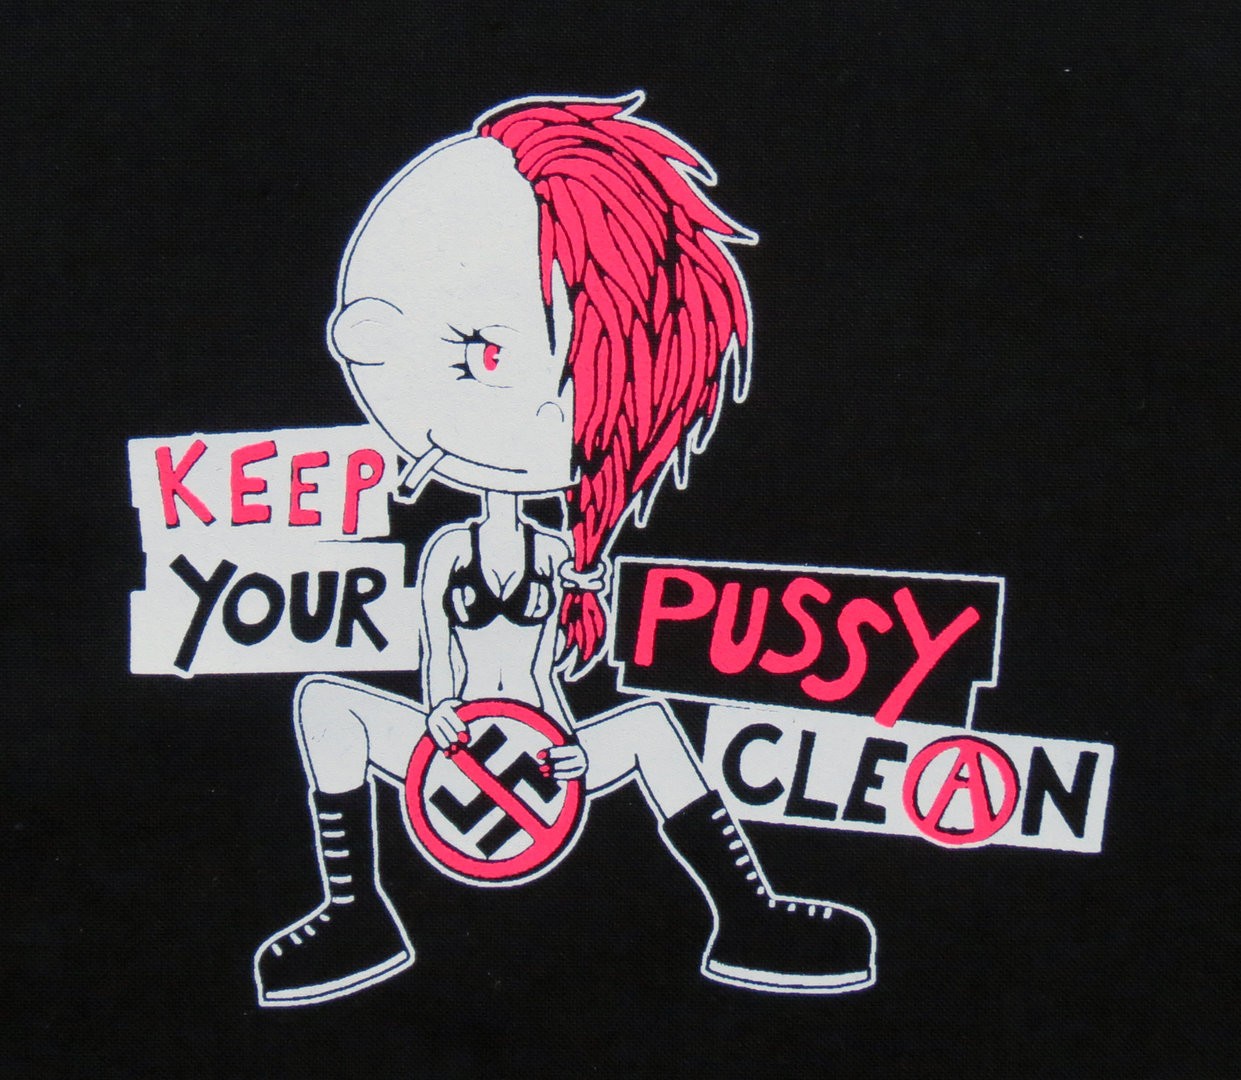 Keep Your Willie/Pussy Clean